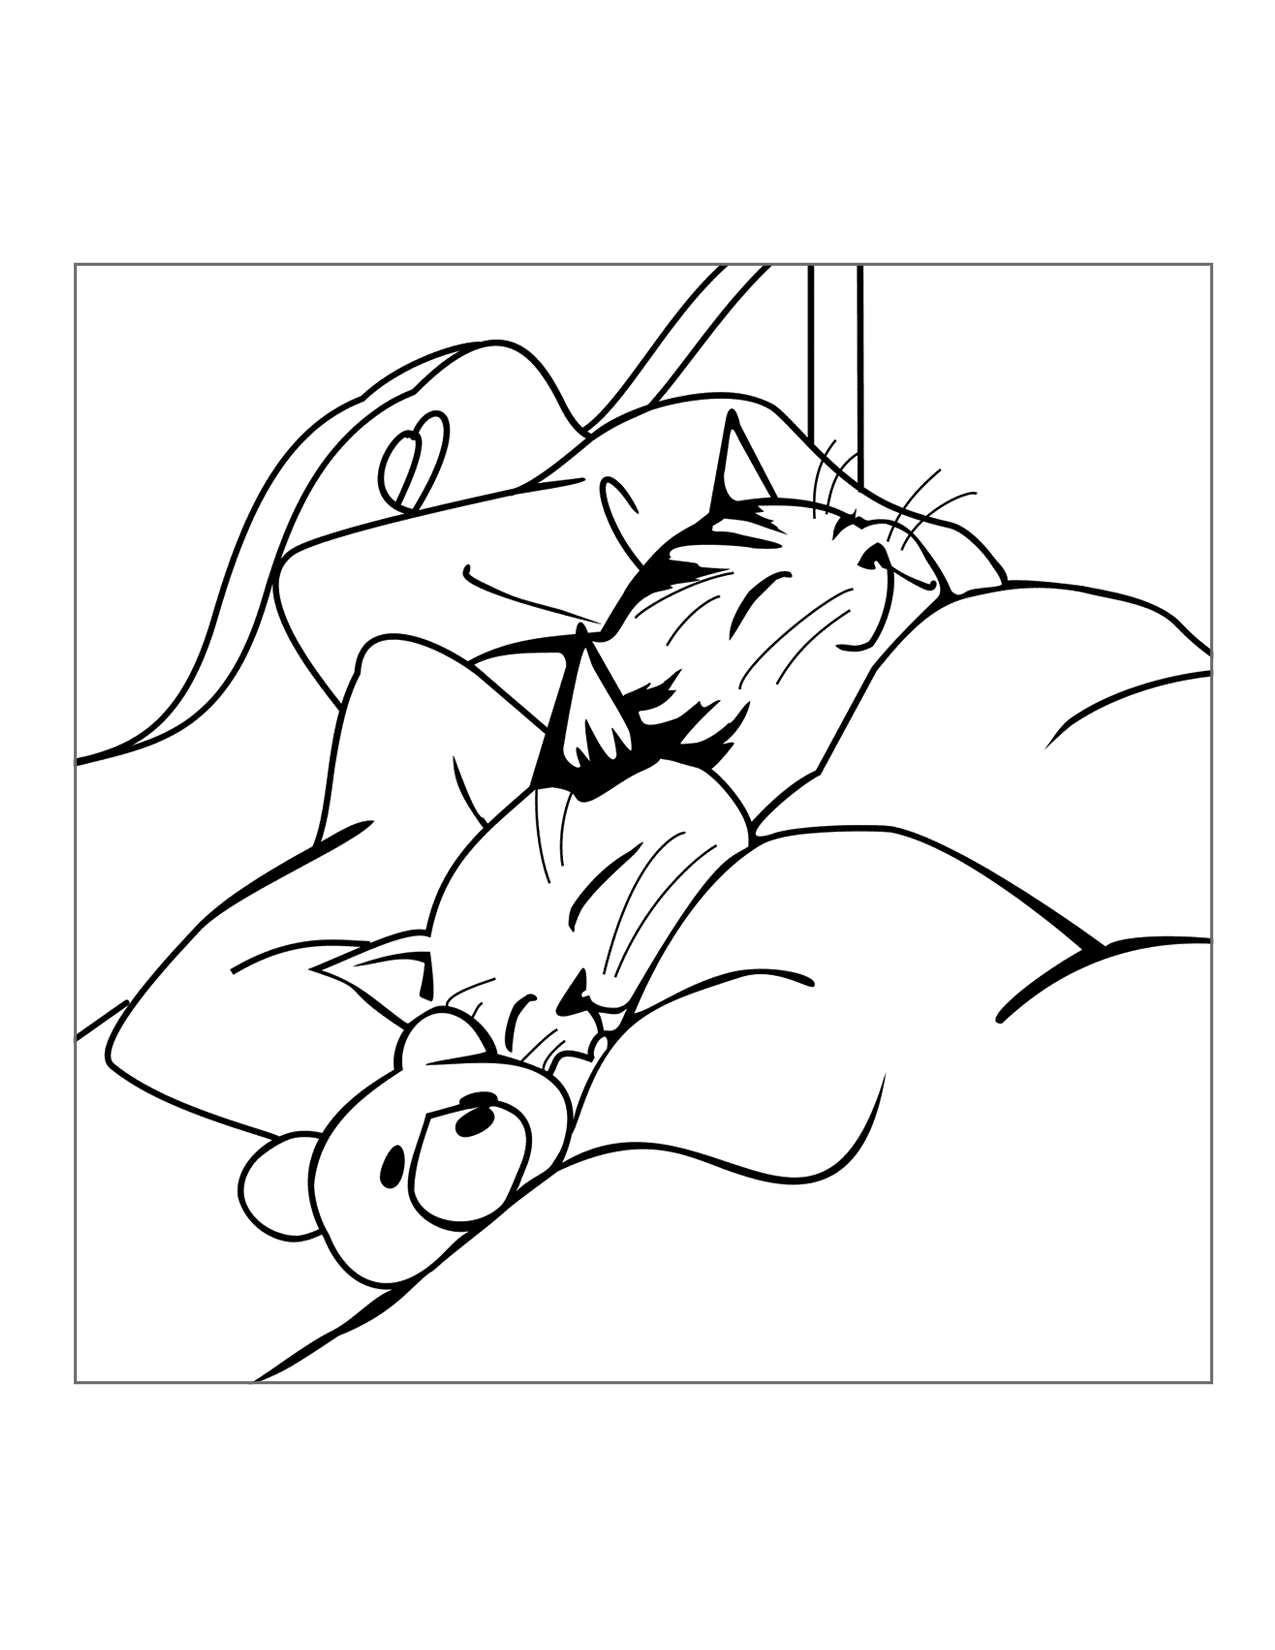 Sleeping Kittens Coloring Page